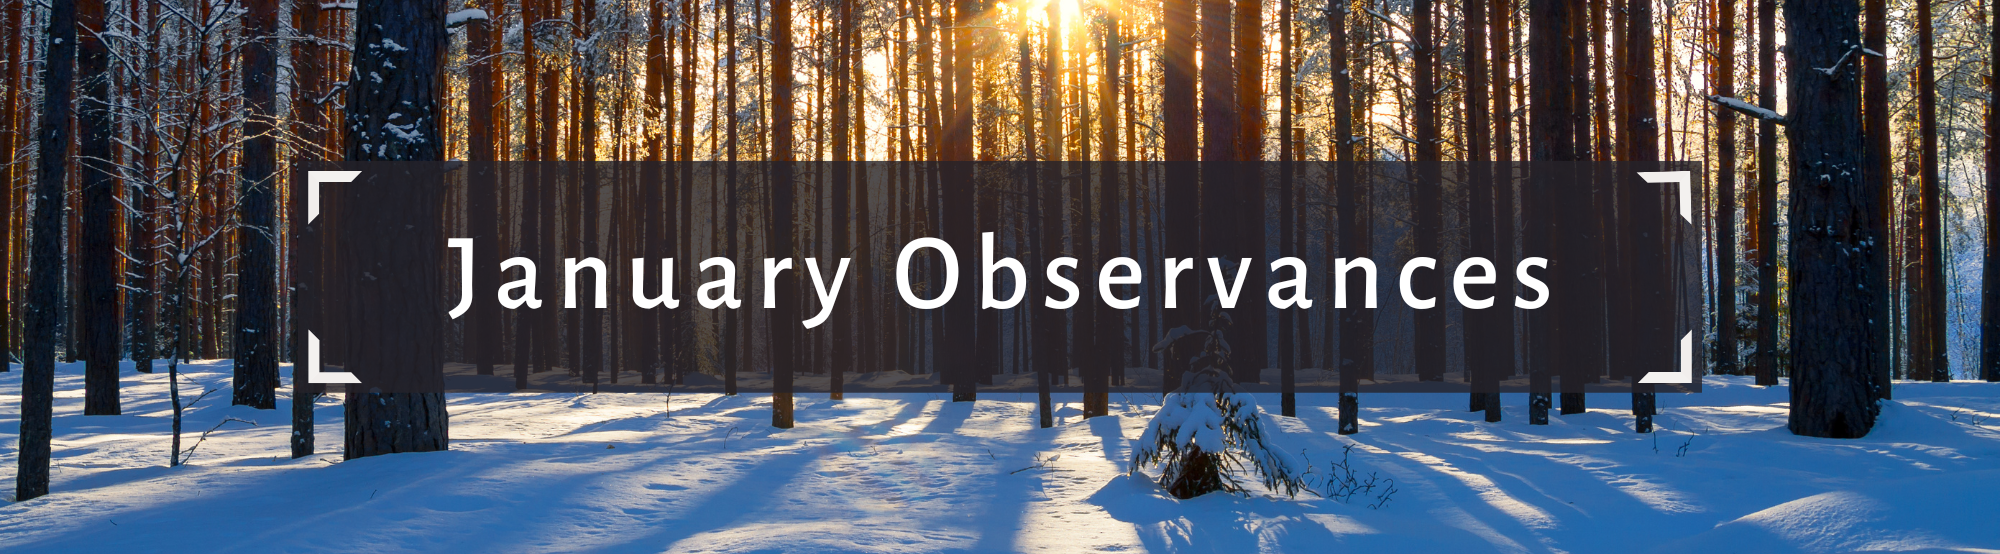 Image of a snowy forest with the sun shining through the trees with the text: January Observnaces